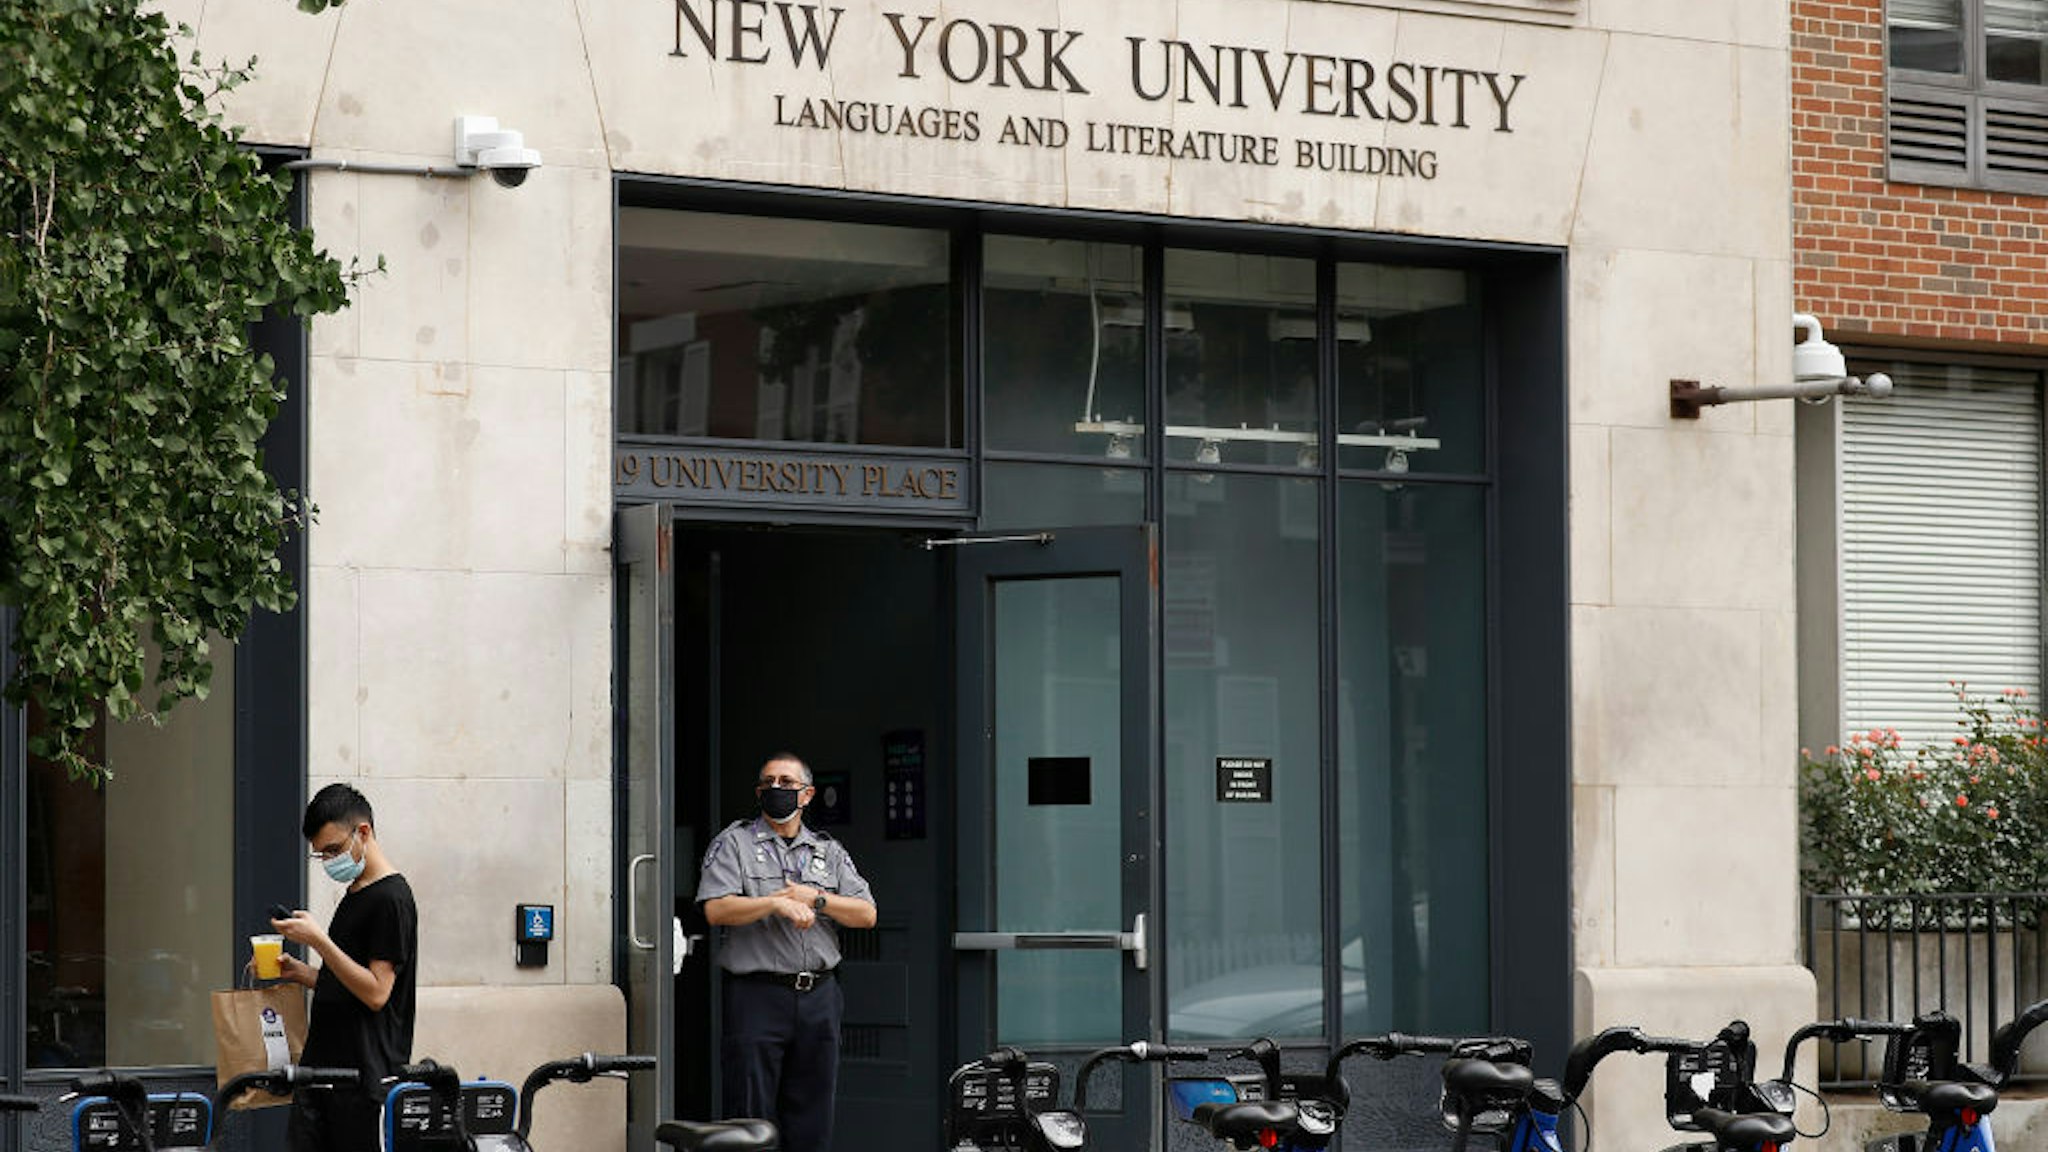 NEW YORK, NEW YORK- SEPTEMBER 17: A security guard stand outside a New York University building during Phase 4 of re-opening following restrictions imposed to slow the spread of coronavirus on September 17, 2020 in New York City . The fourth phase allows outdoor arts and entertainment, sporting events without fans and media production.